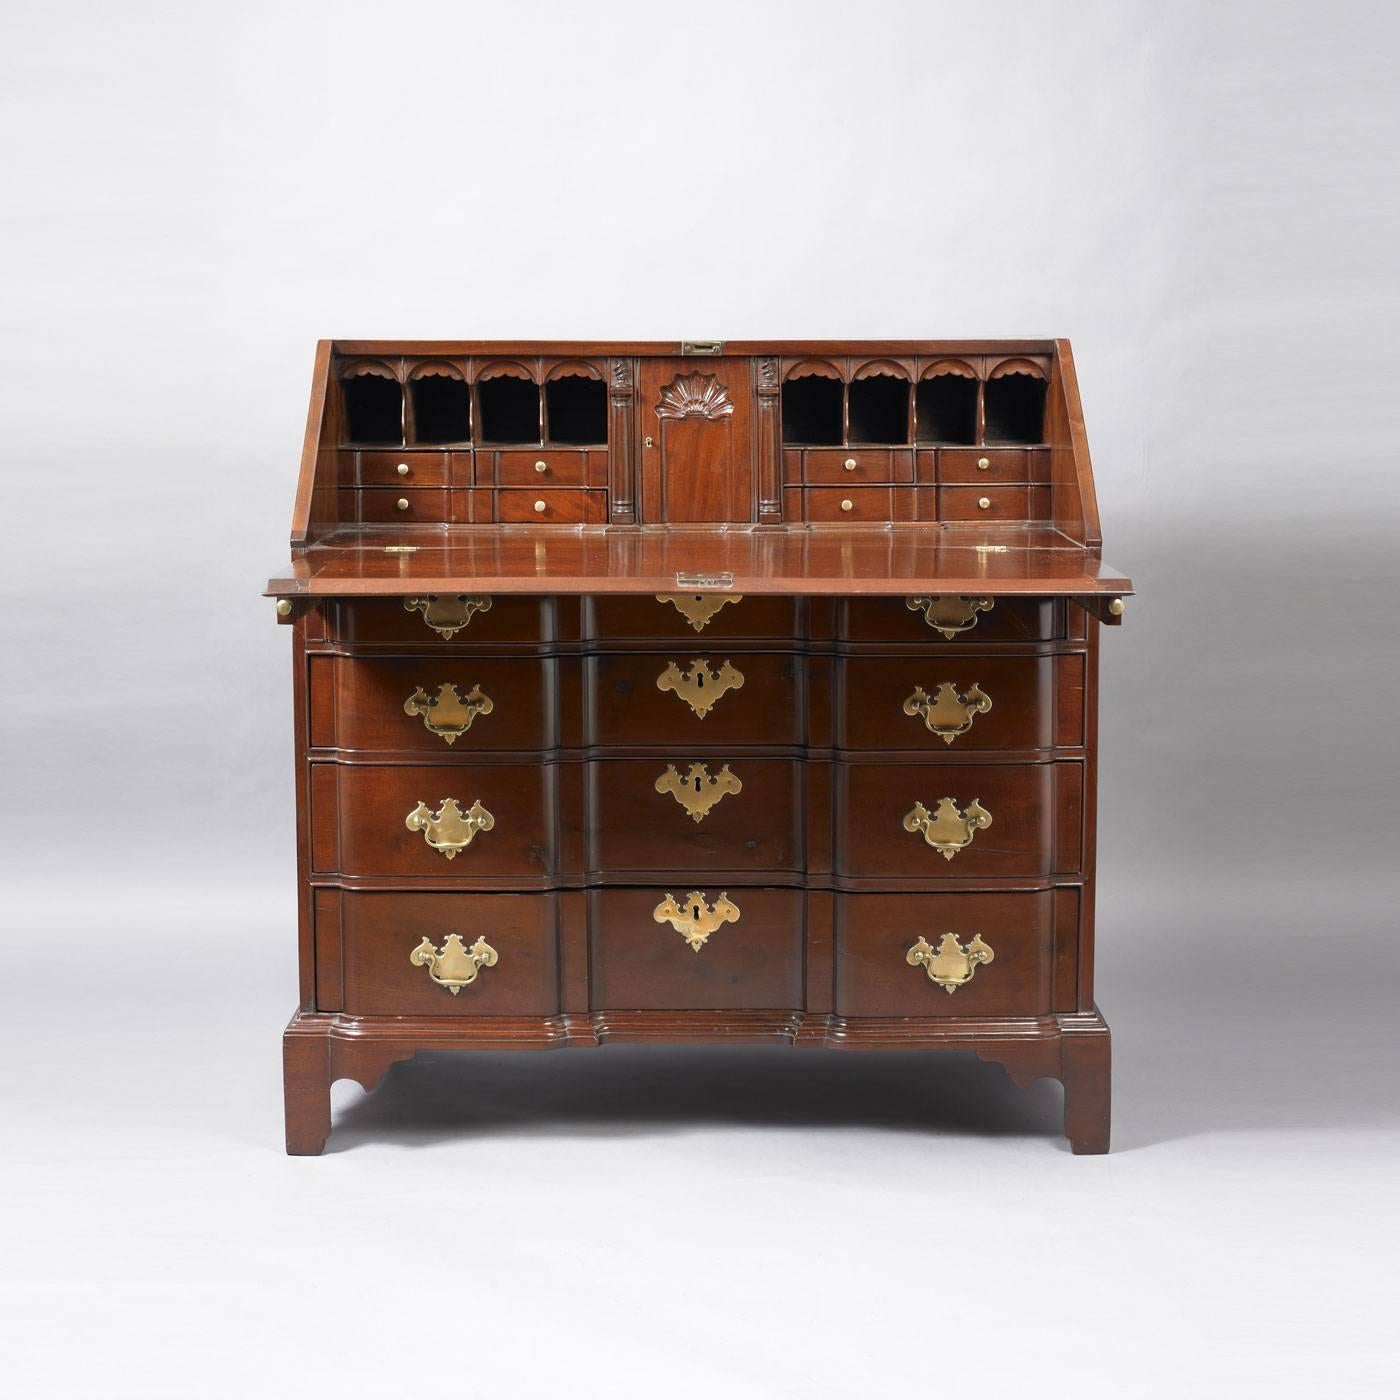 Massachusetts, circa 1765-1775.
Mahogany, pine secondary wood.
The slant lid desk opens to a fitted interior having a central shell carved prospect door flanked by pilaster column document drawers flanked by shaped valances over pigeon holes over